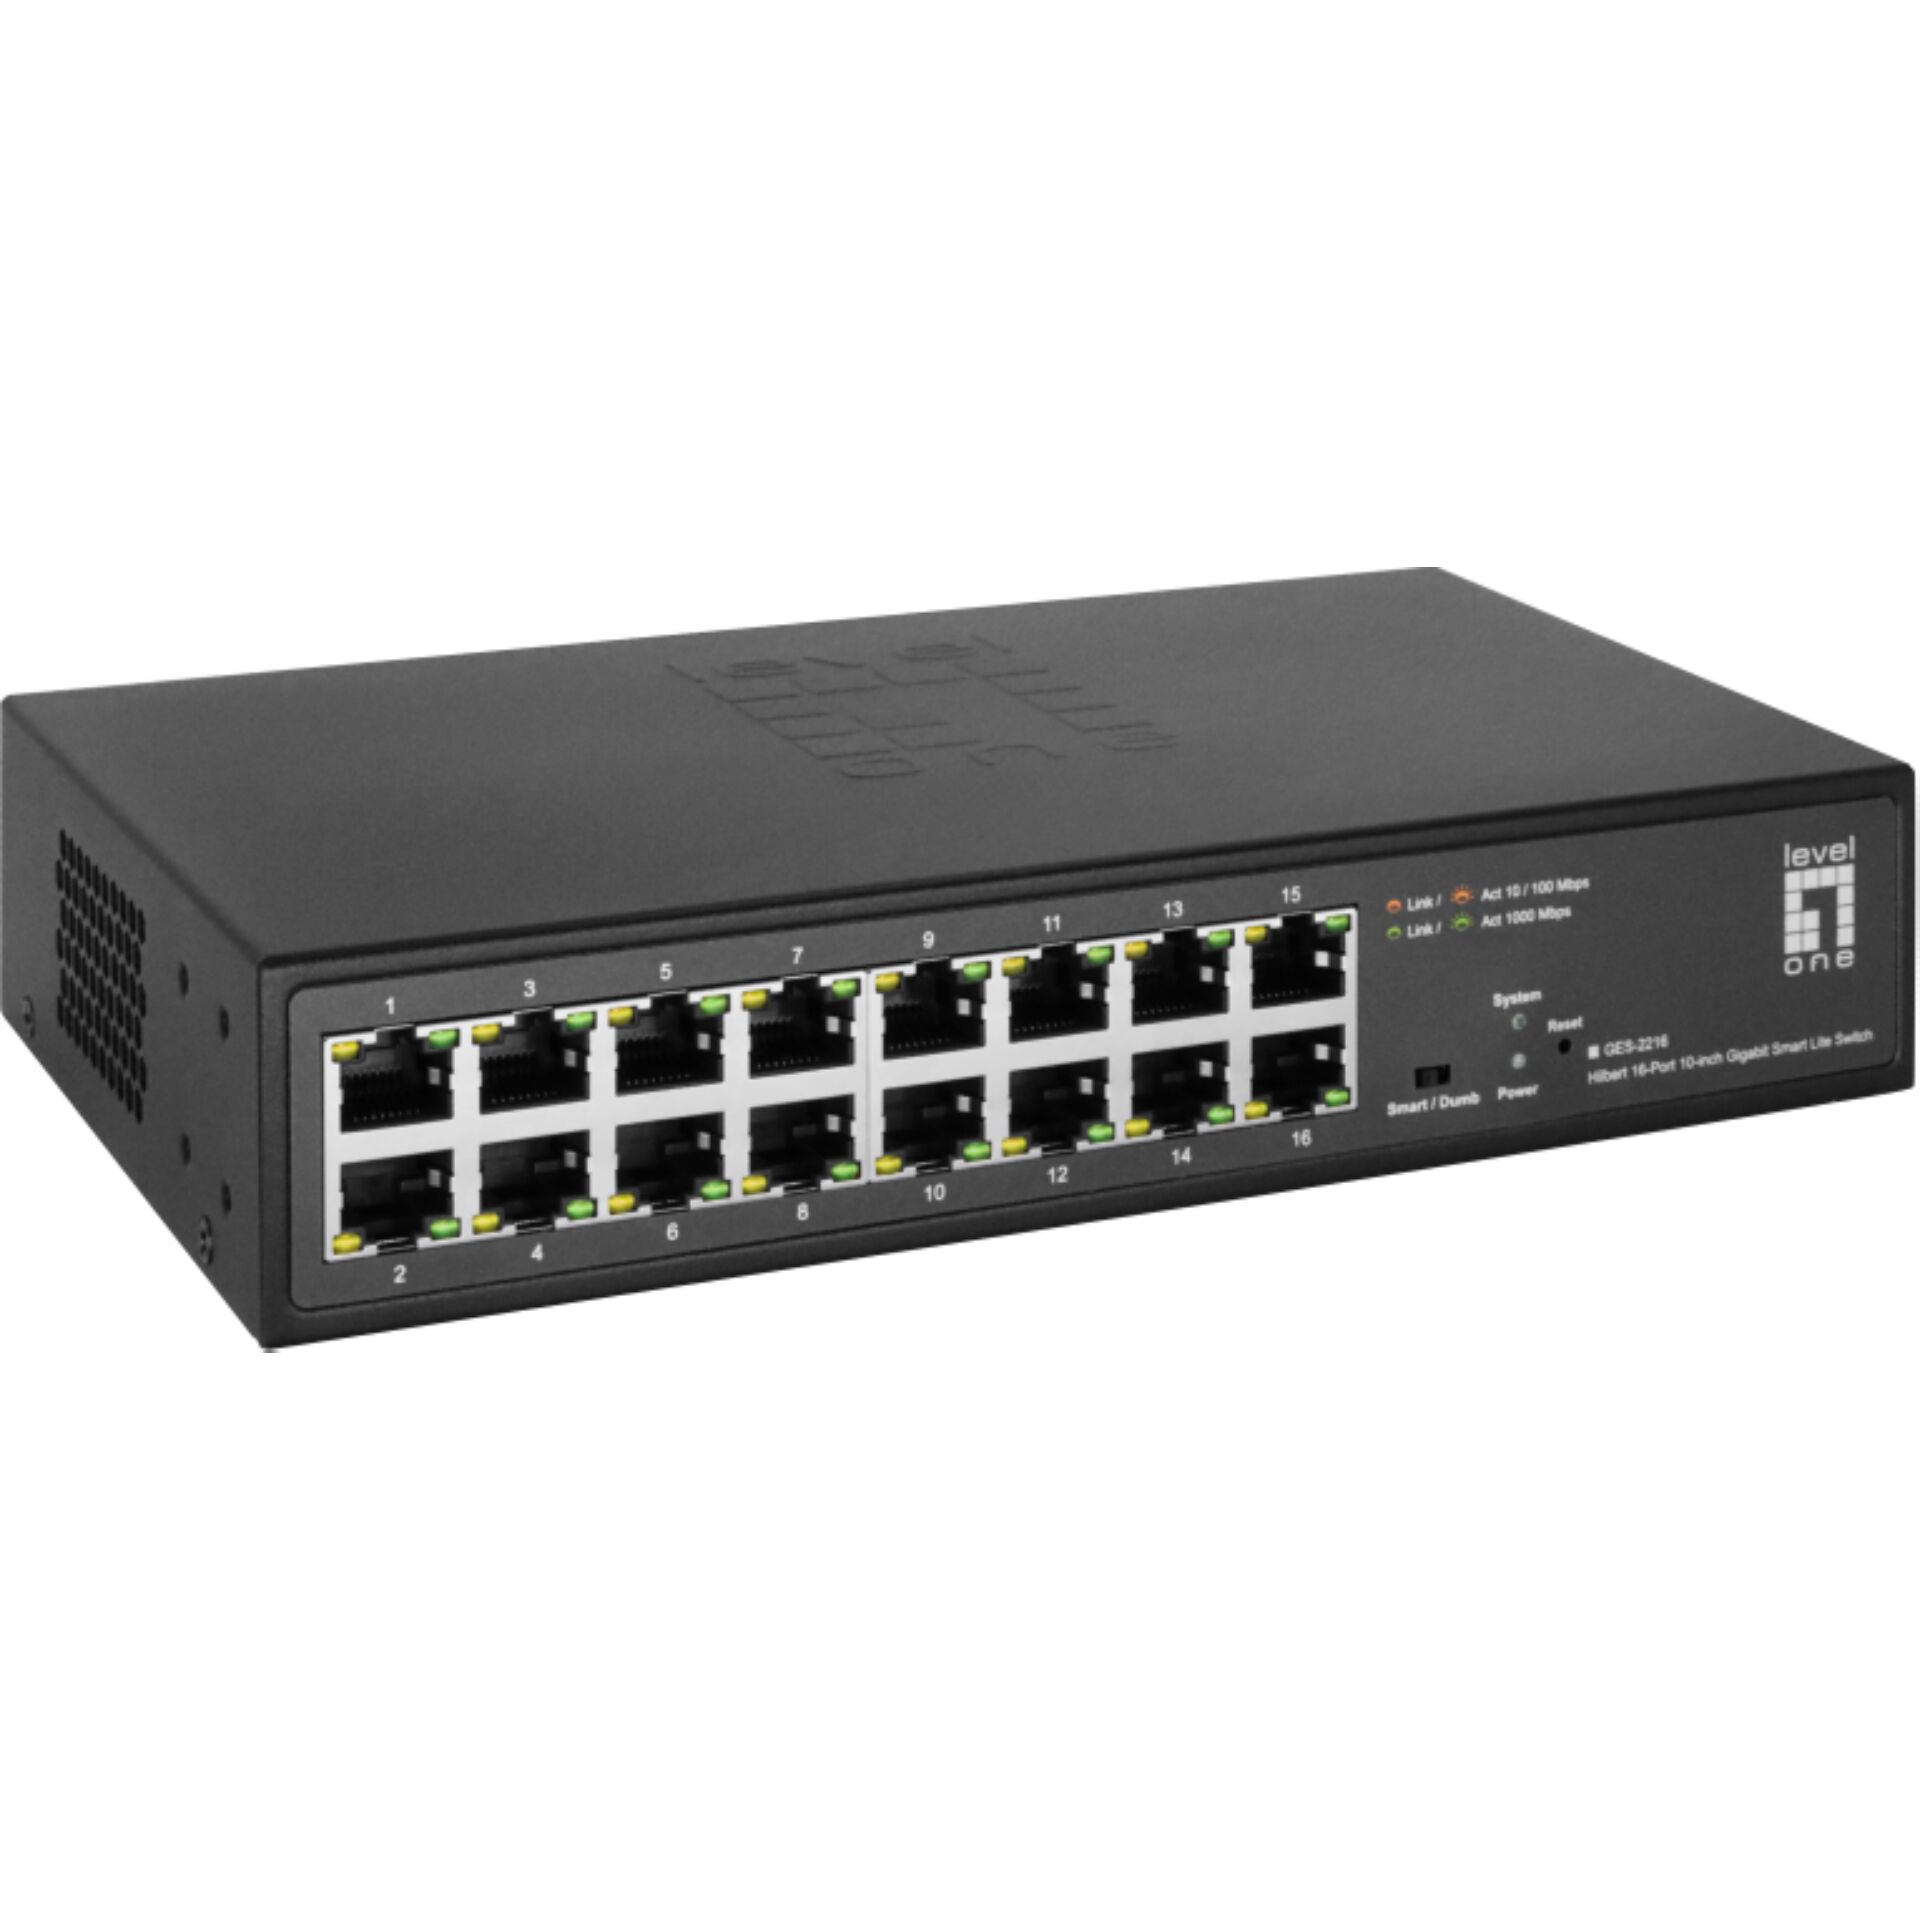 Level One GES-2216 Hilbert 16Port 10inch Gb Switch